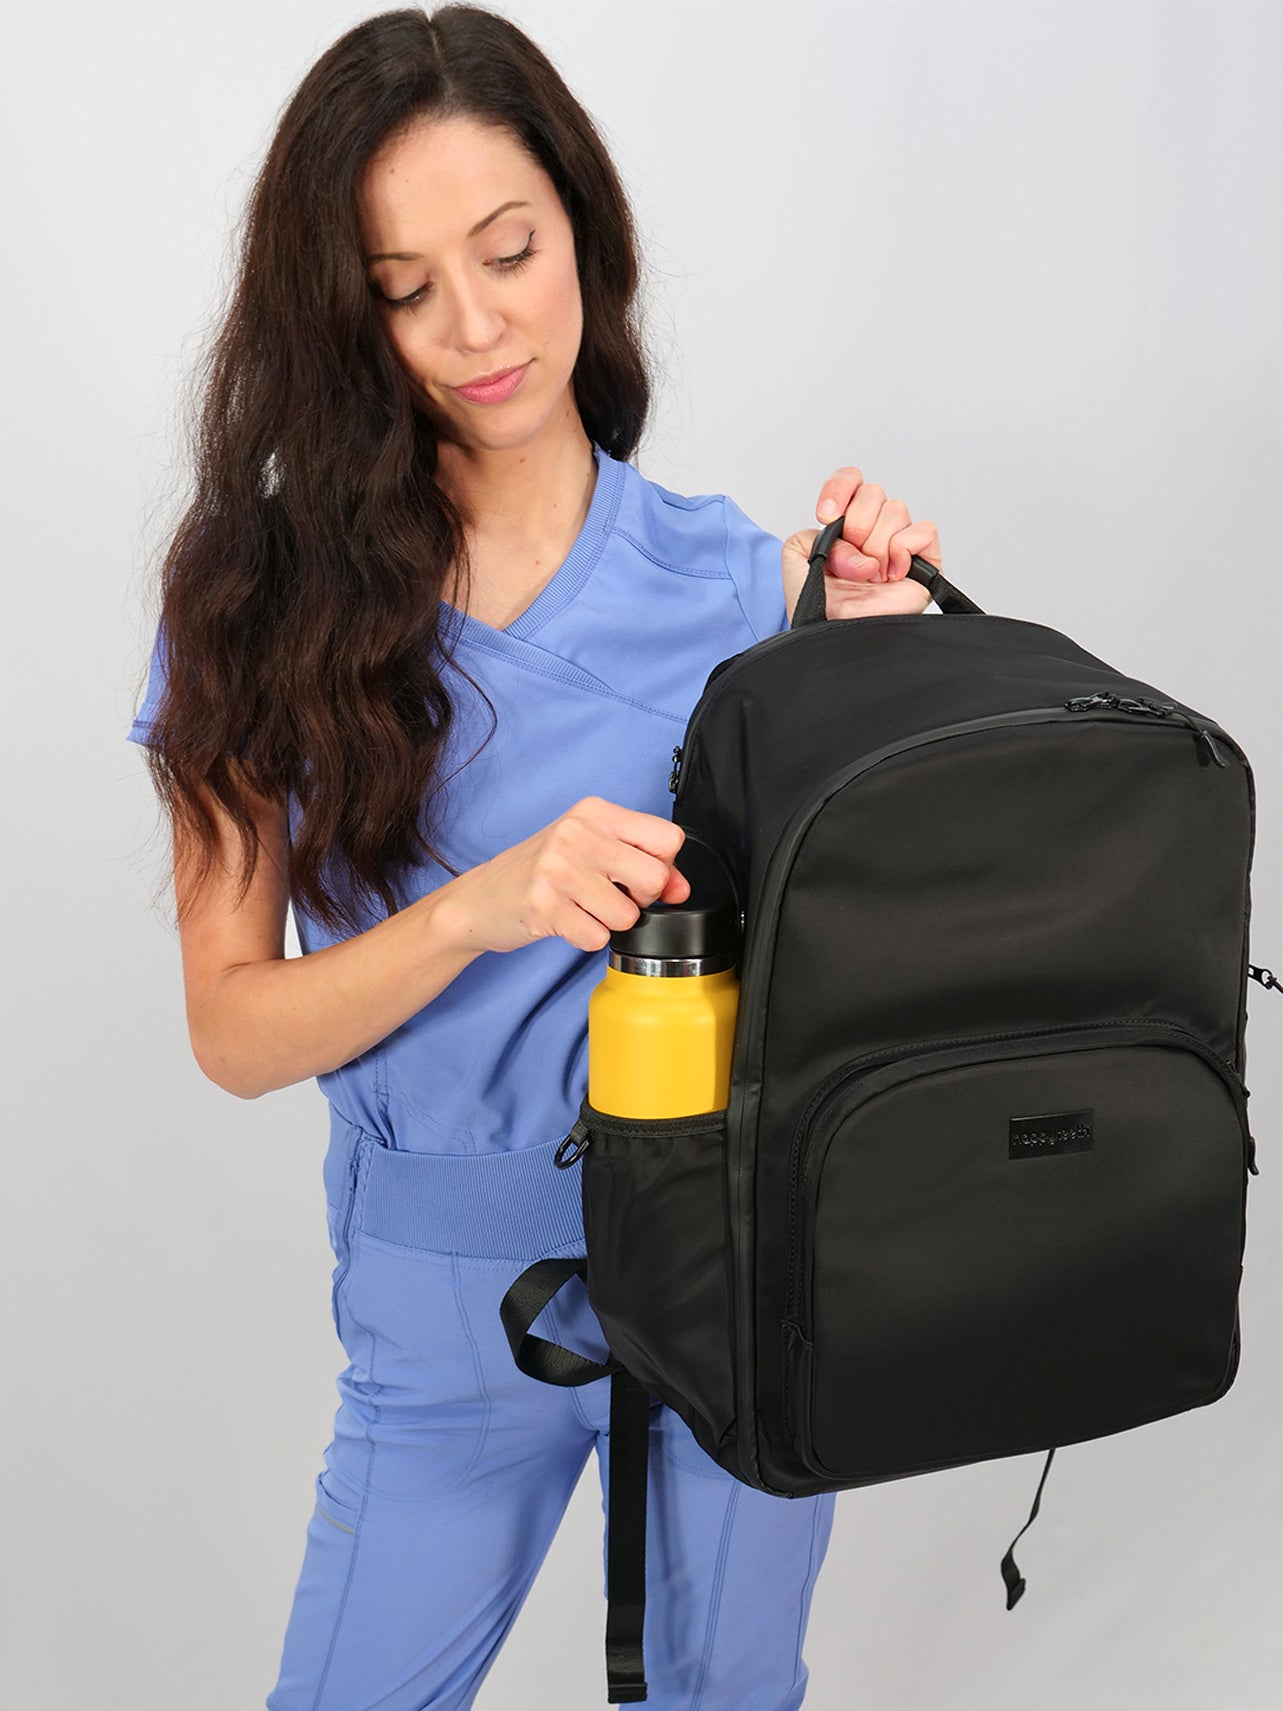 CURMIO Home Health Nurse Bag, Medical Supplies Bag with Padded Laptop  Sleeve for Home Visits, Health Care, Hospice, Bag ONLY, Black (Patent  Pending) : Amazon.in: Health & Personal Care